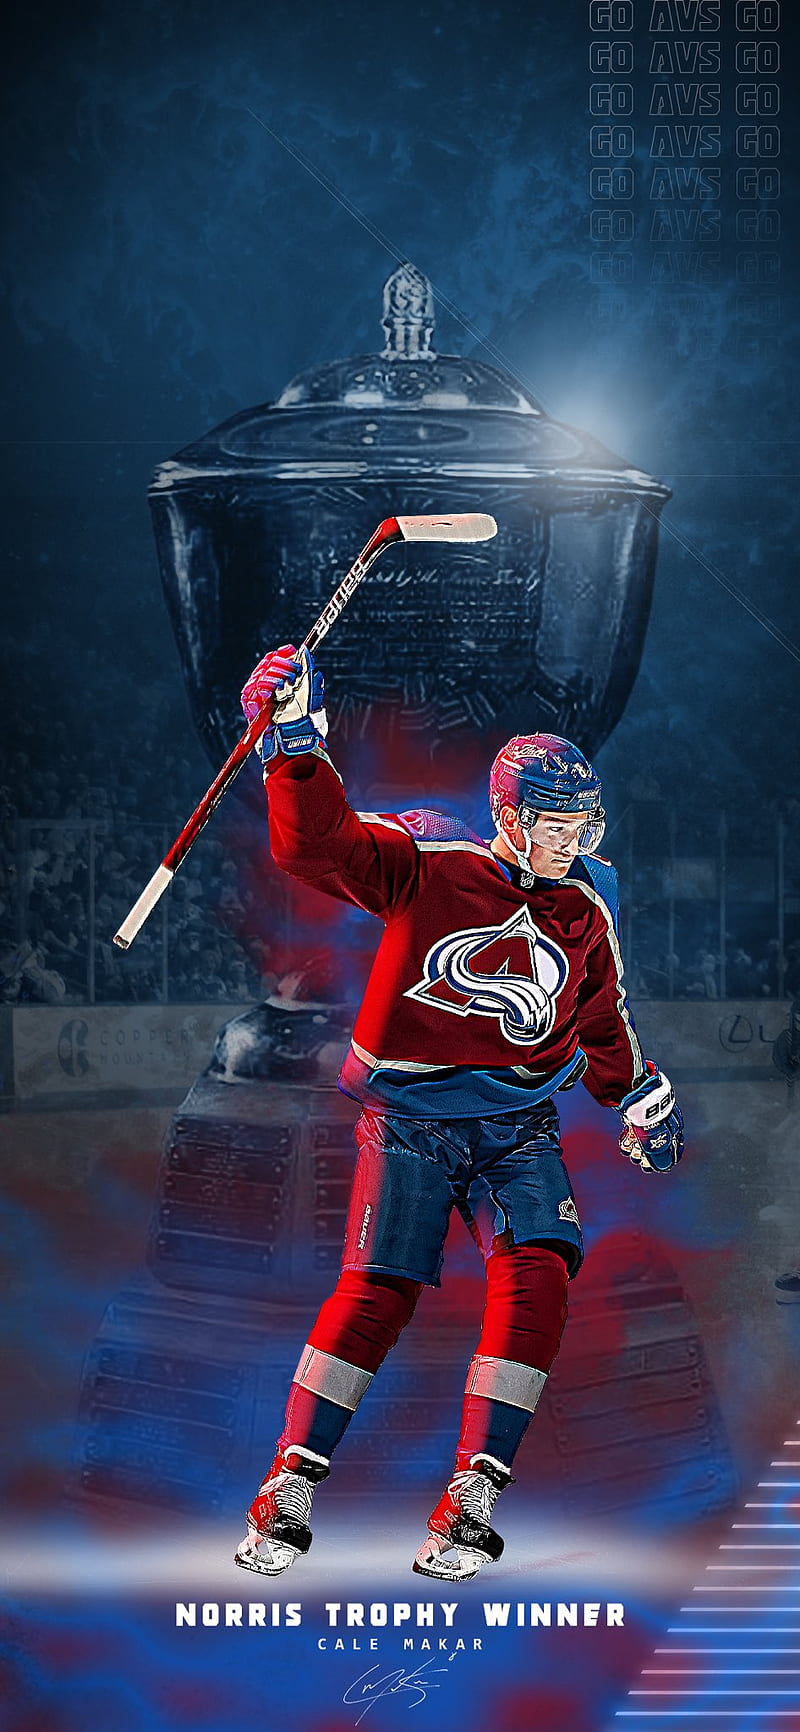 Colorado Avalanche - We're just going to leave this here. #AllHailCale #GoAvsGo / Twitter, Cale Makar, HD phone wallpaper